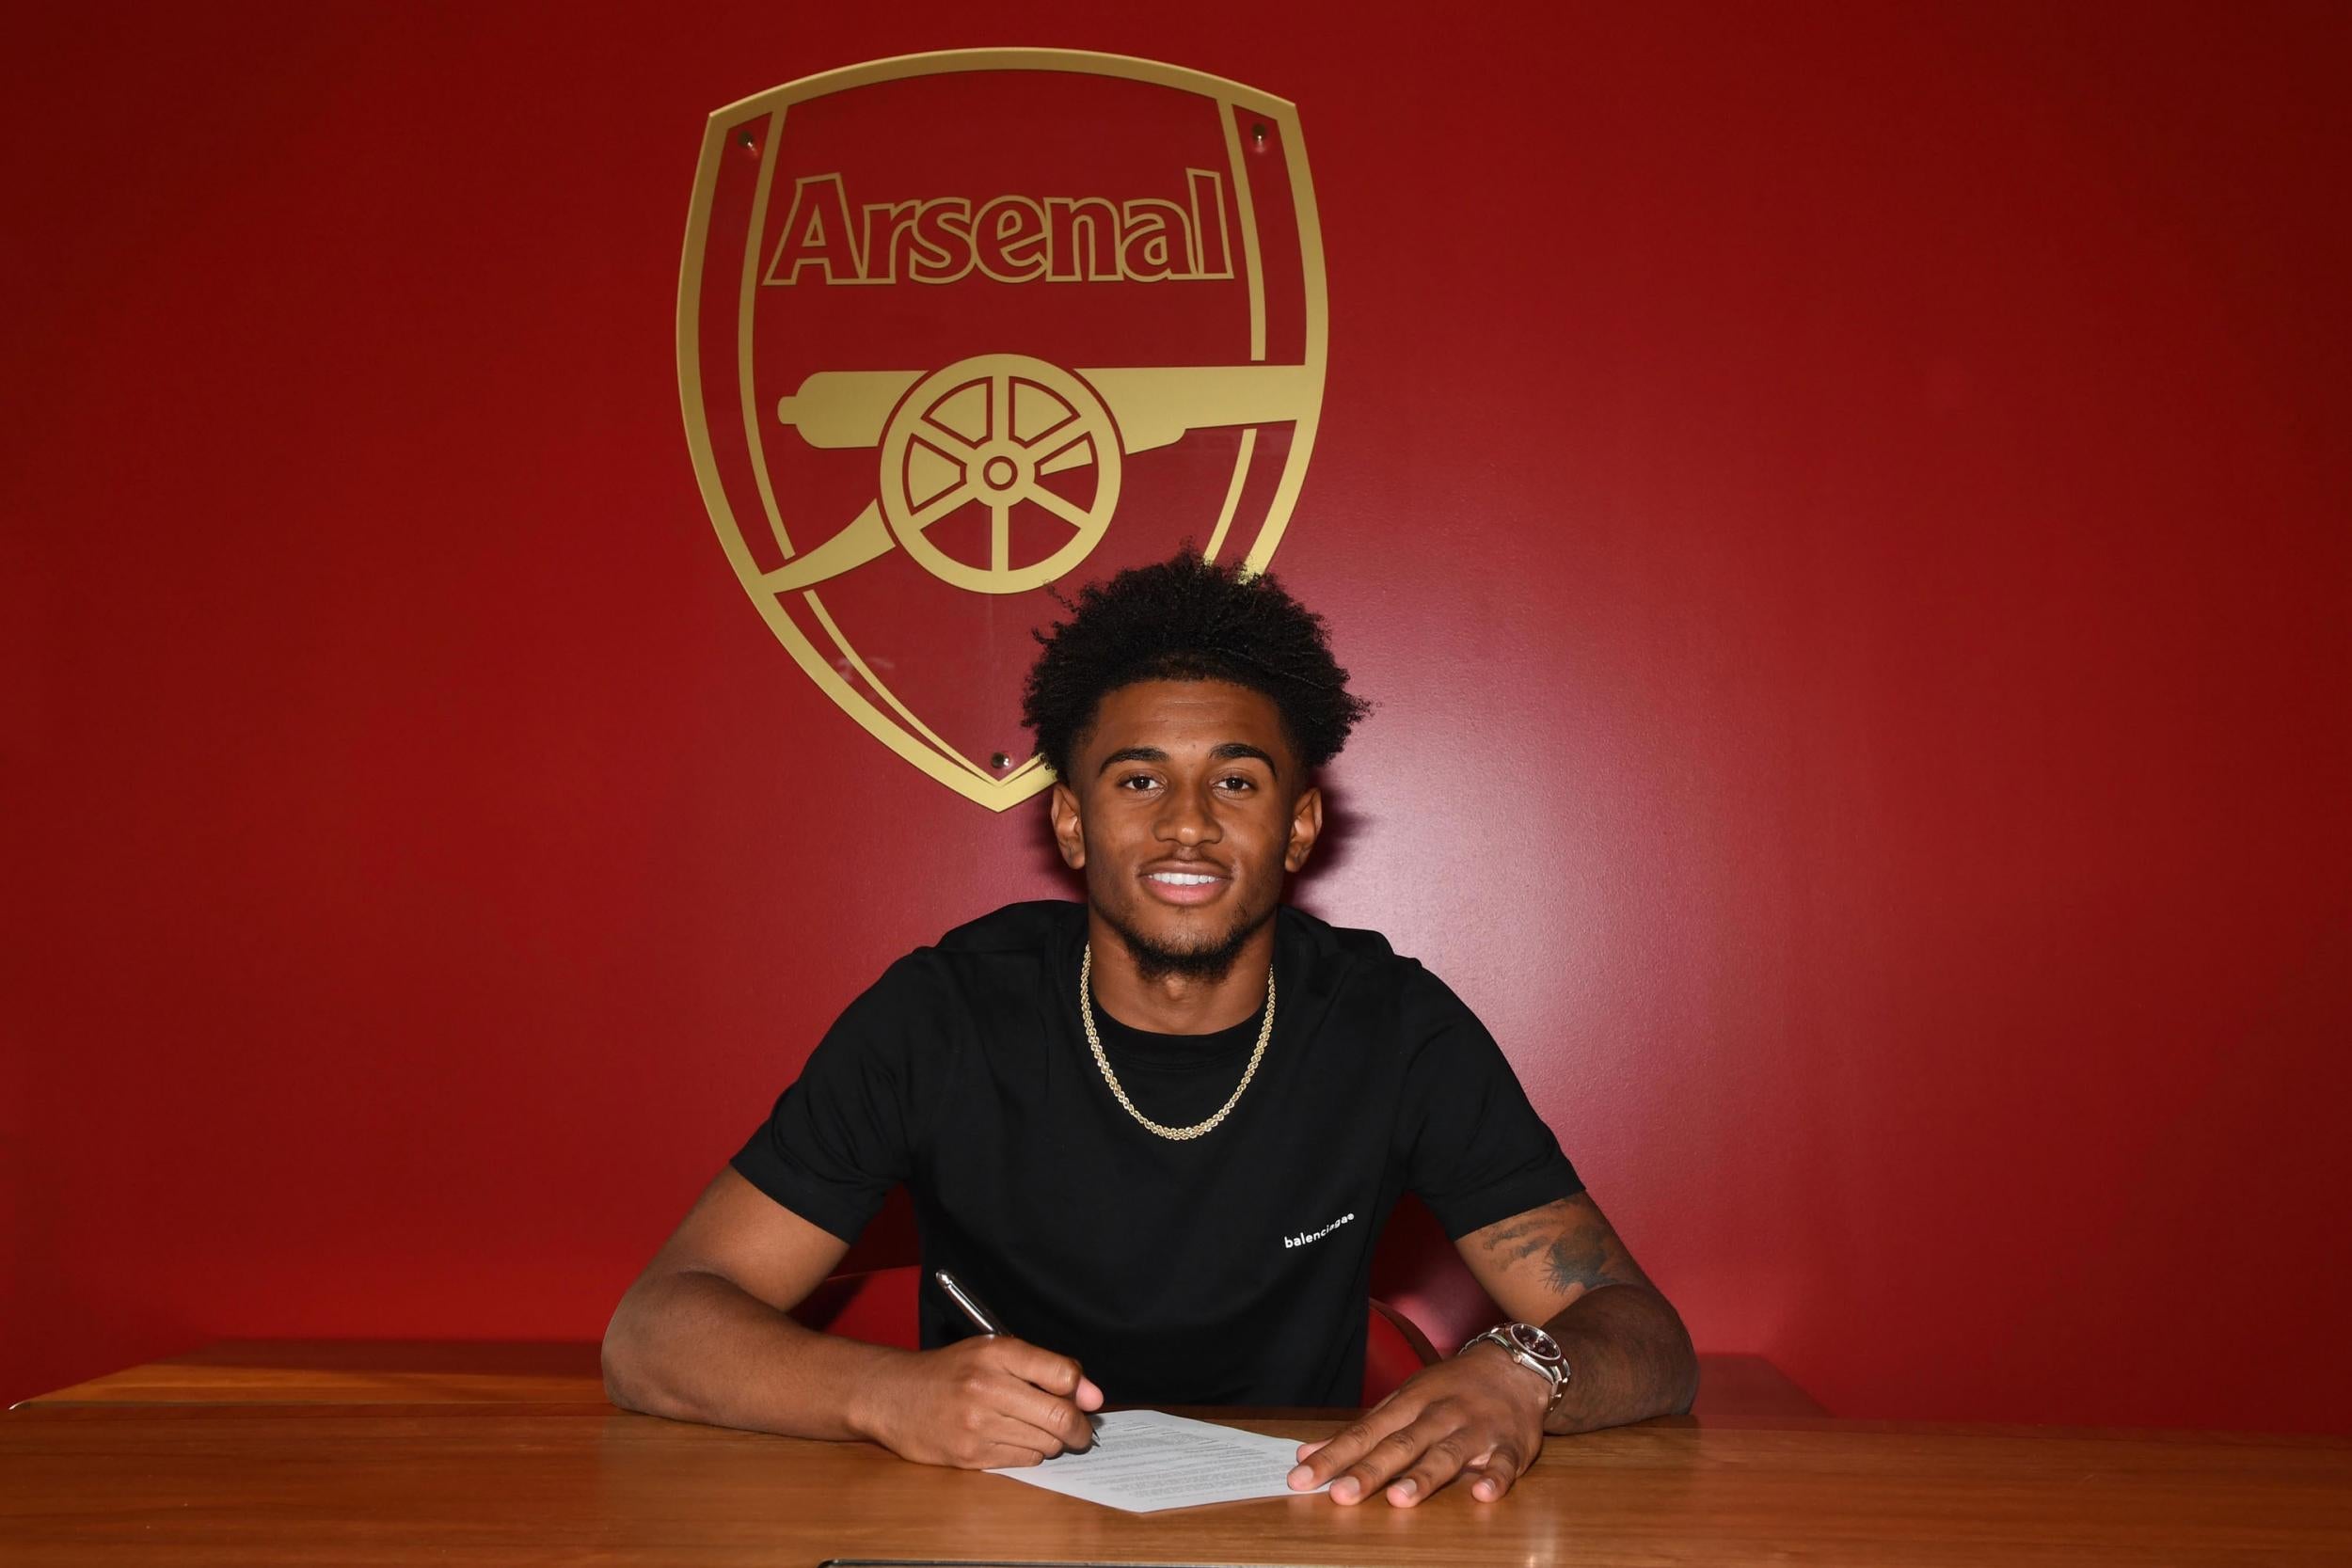 Nelson signed a new contract with Arsenal before joining Hoffenheim